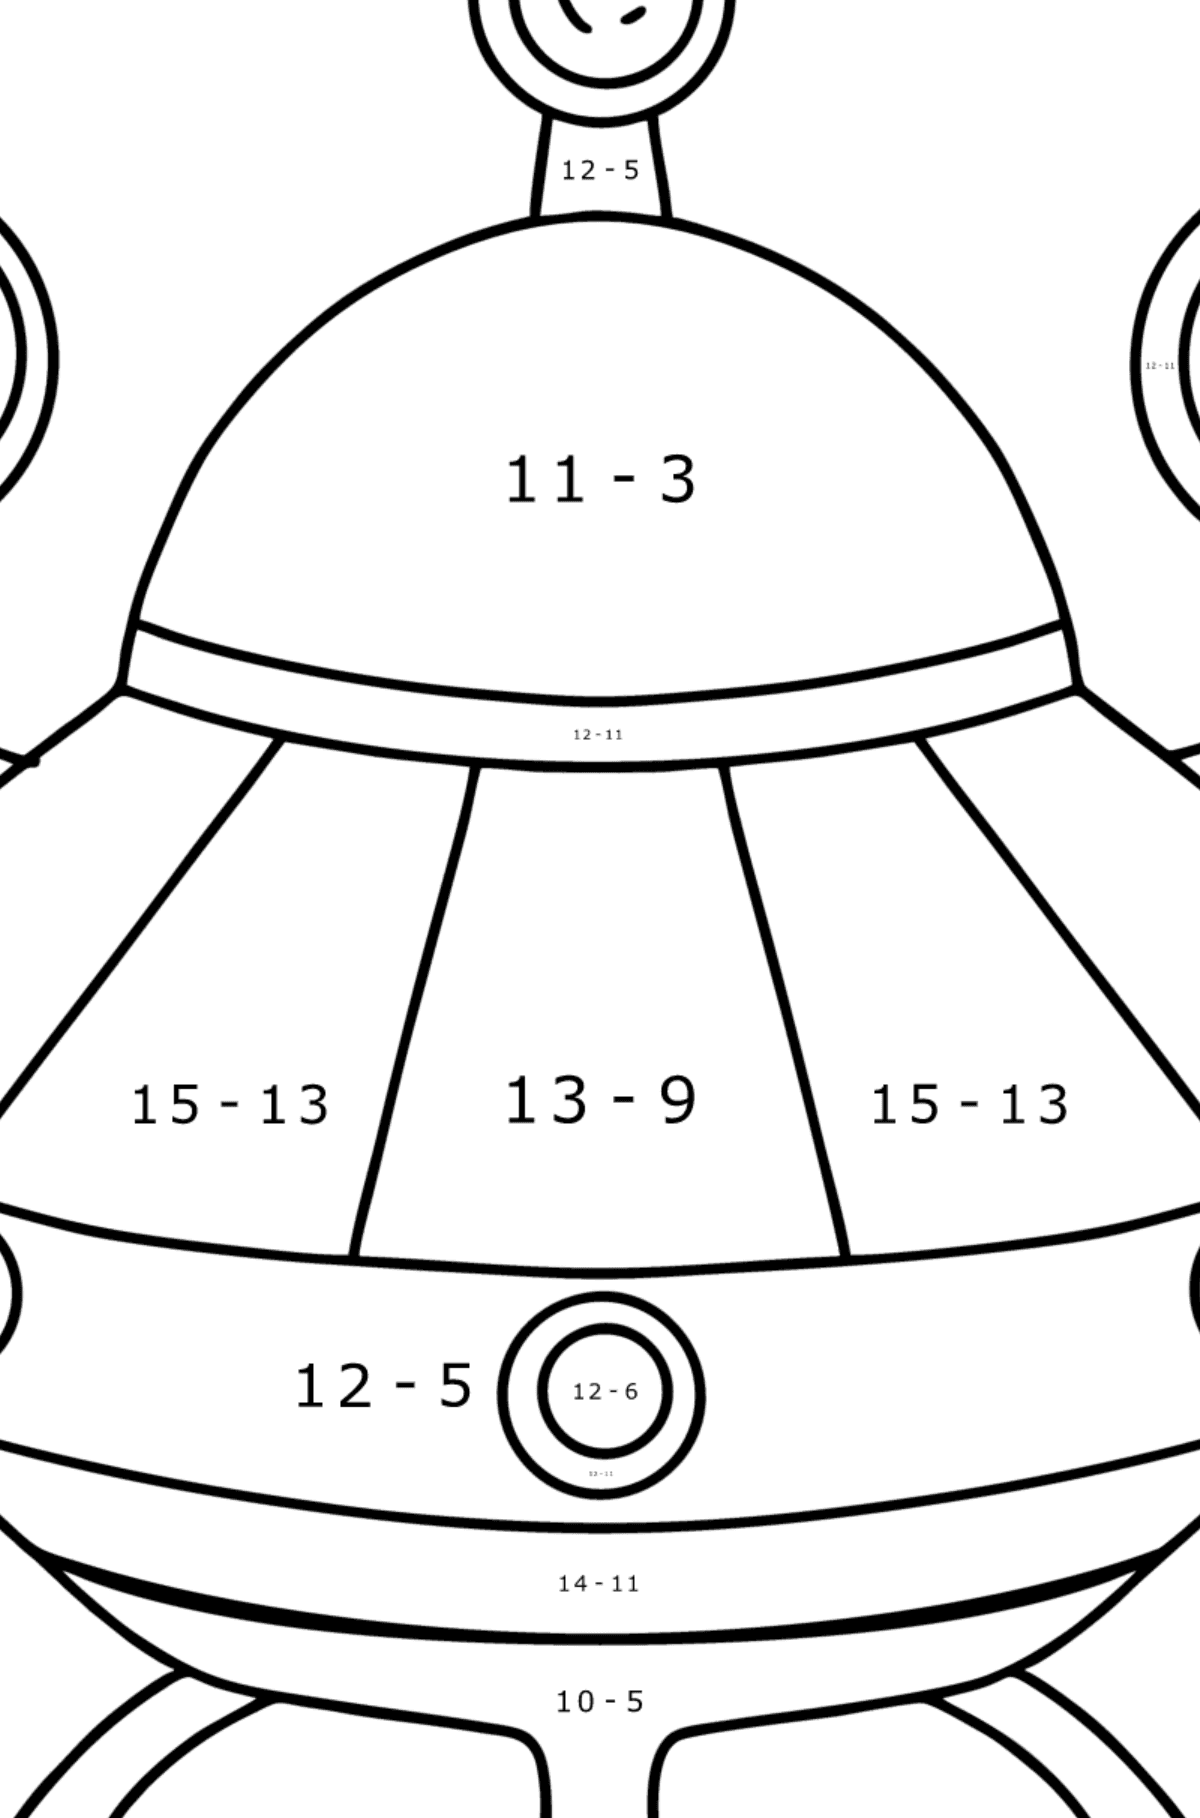 Alien spaceship coloring pages - Math Coloring - Subtraction for Kids